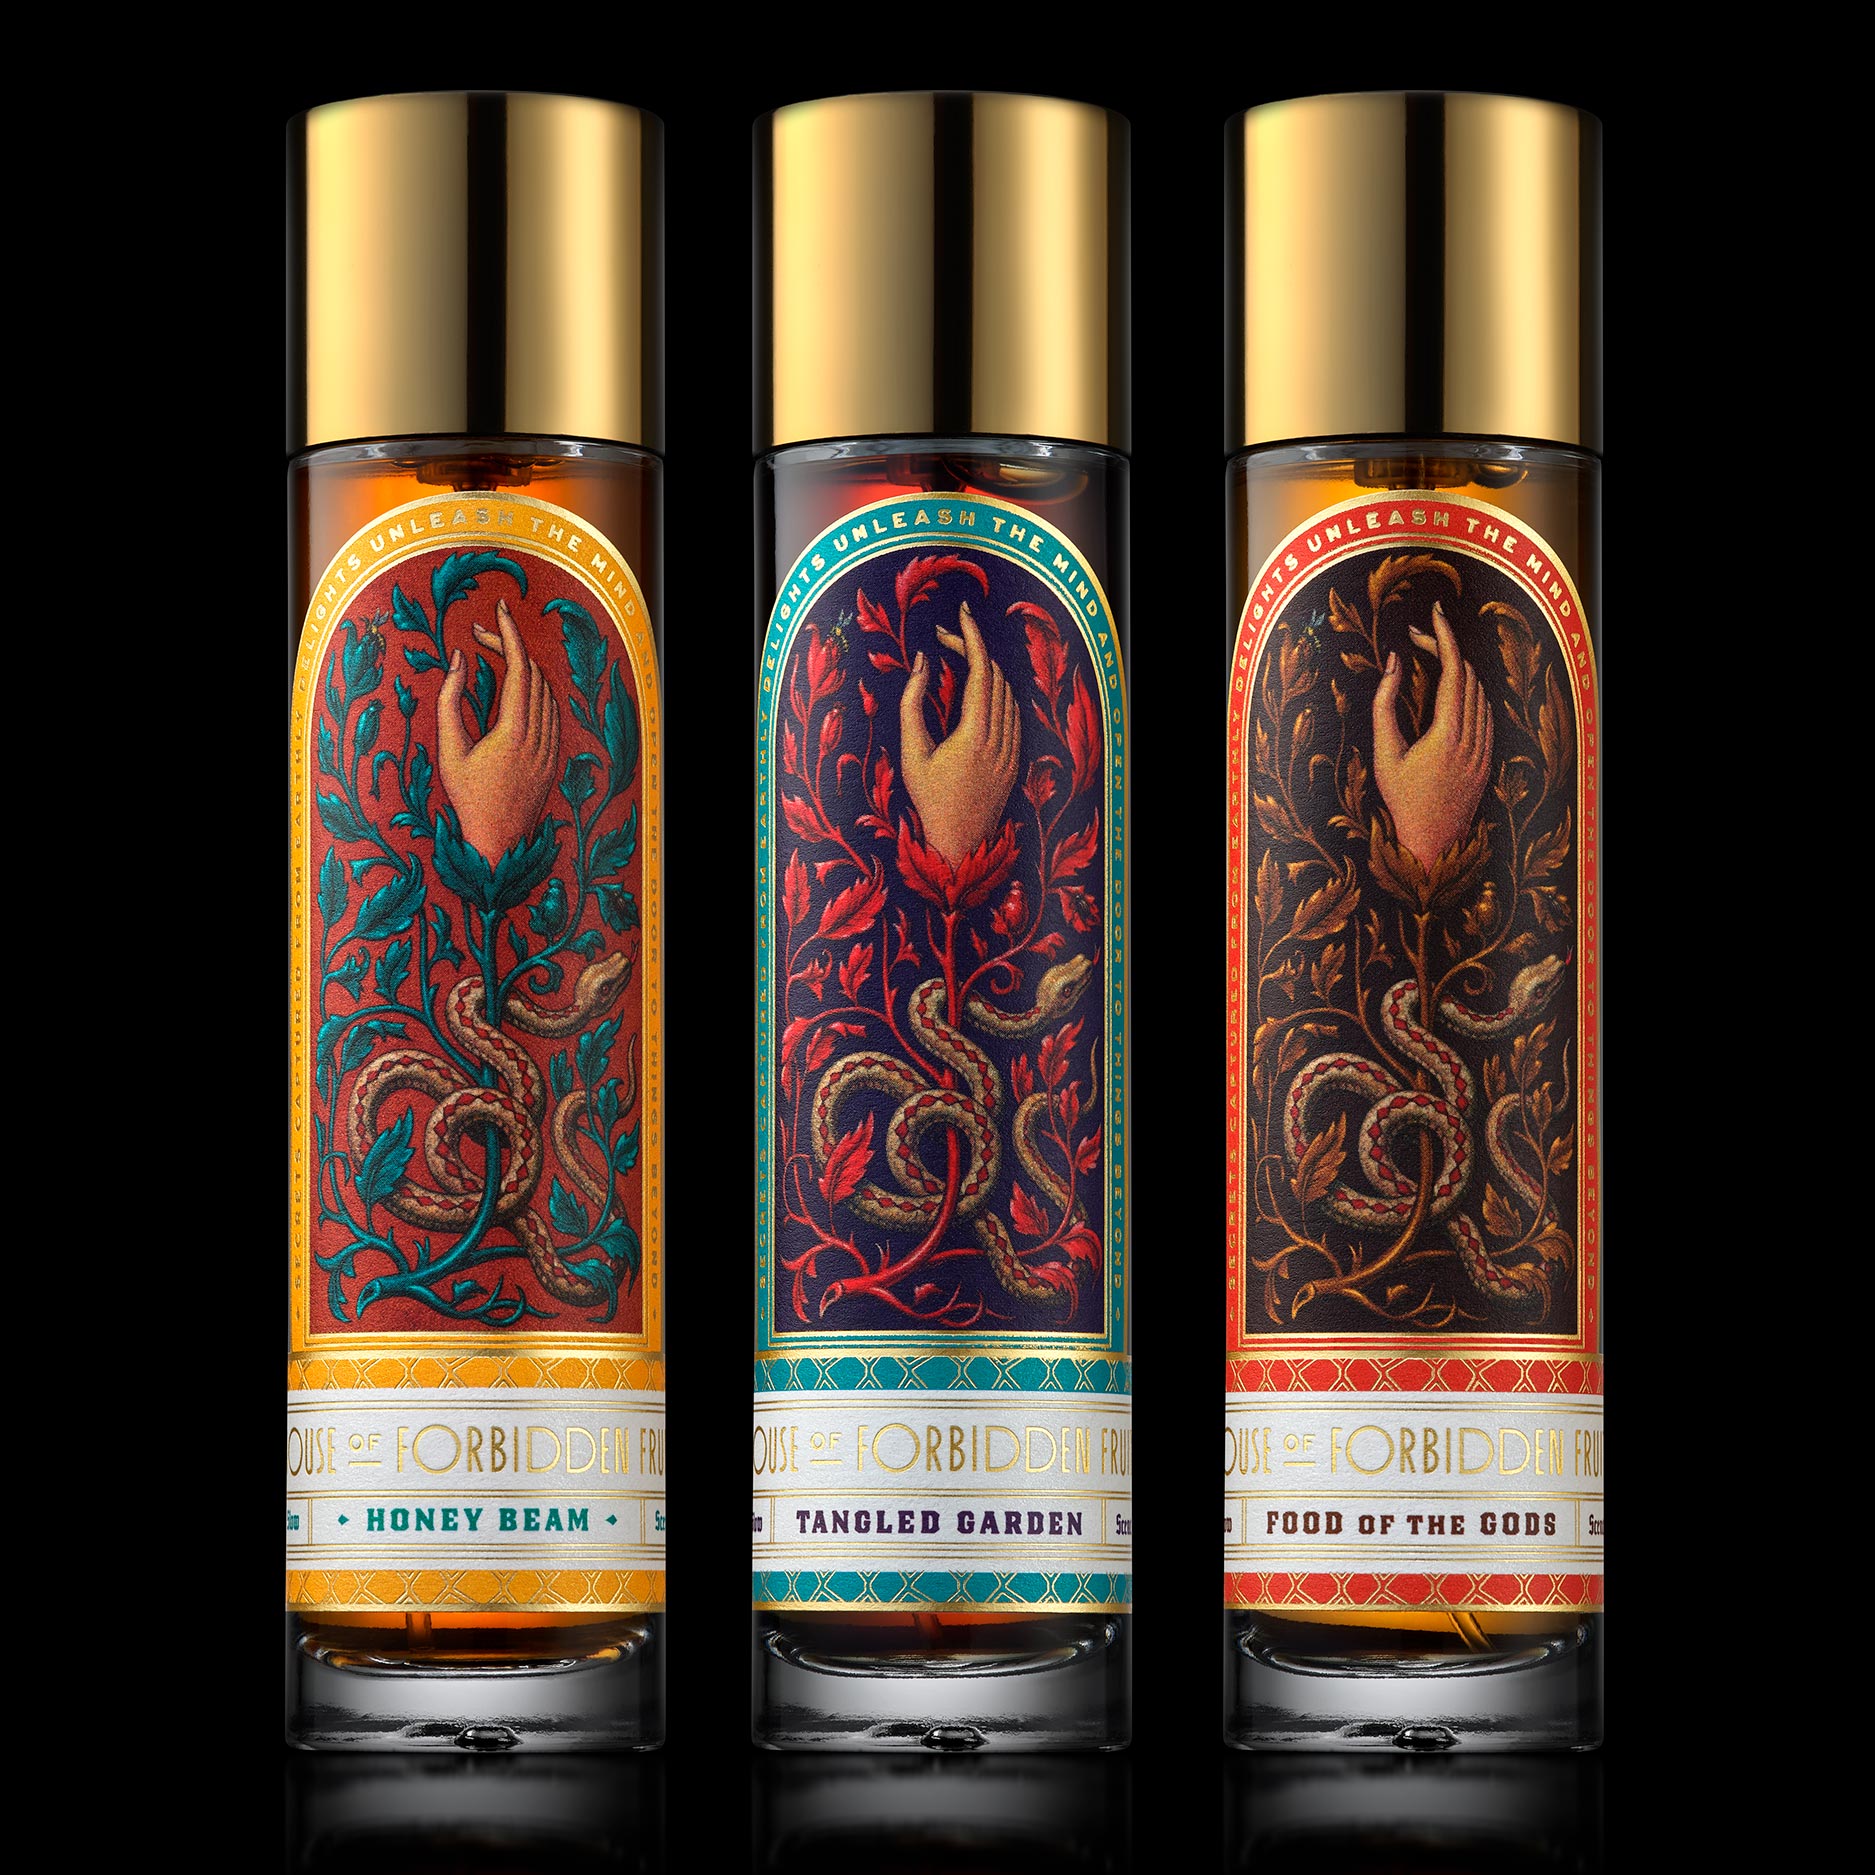 House of Forbidden Fruit perfume branding and package design